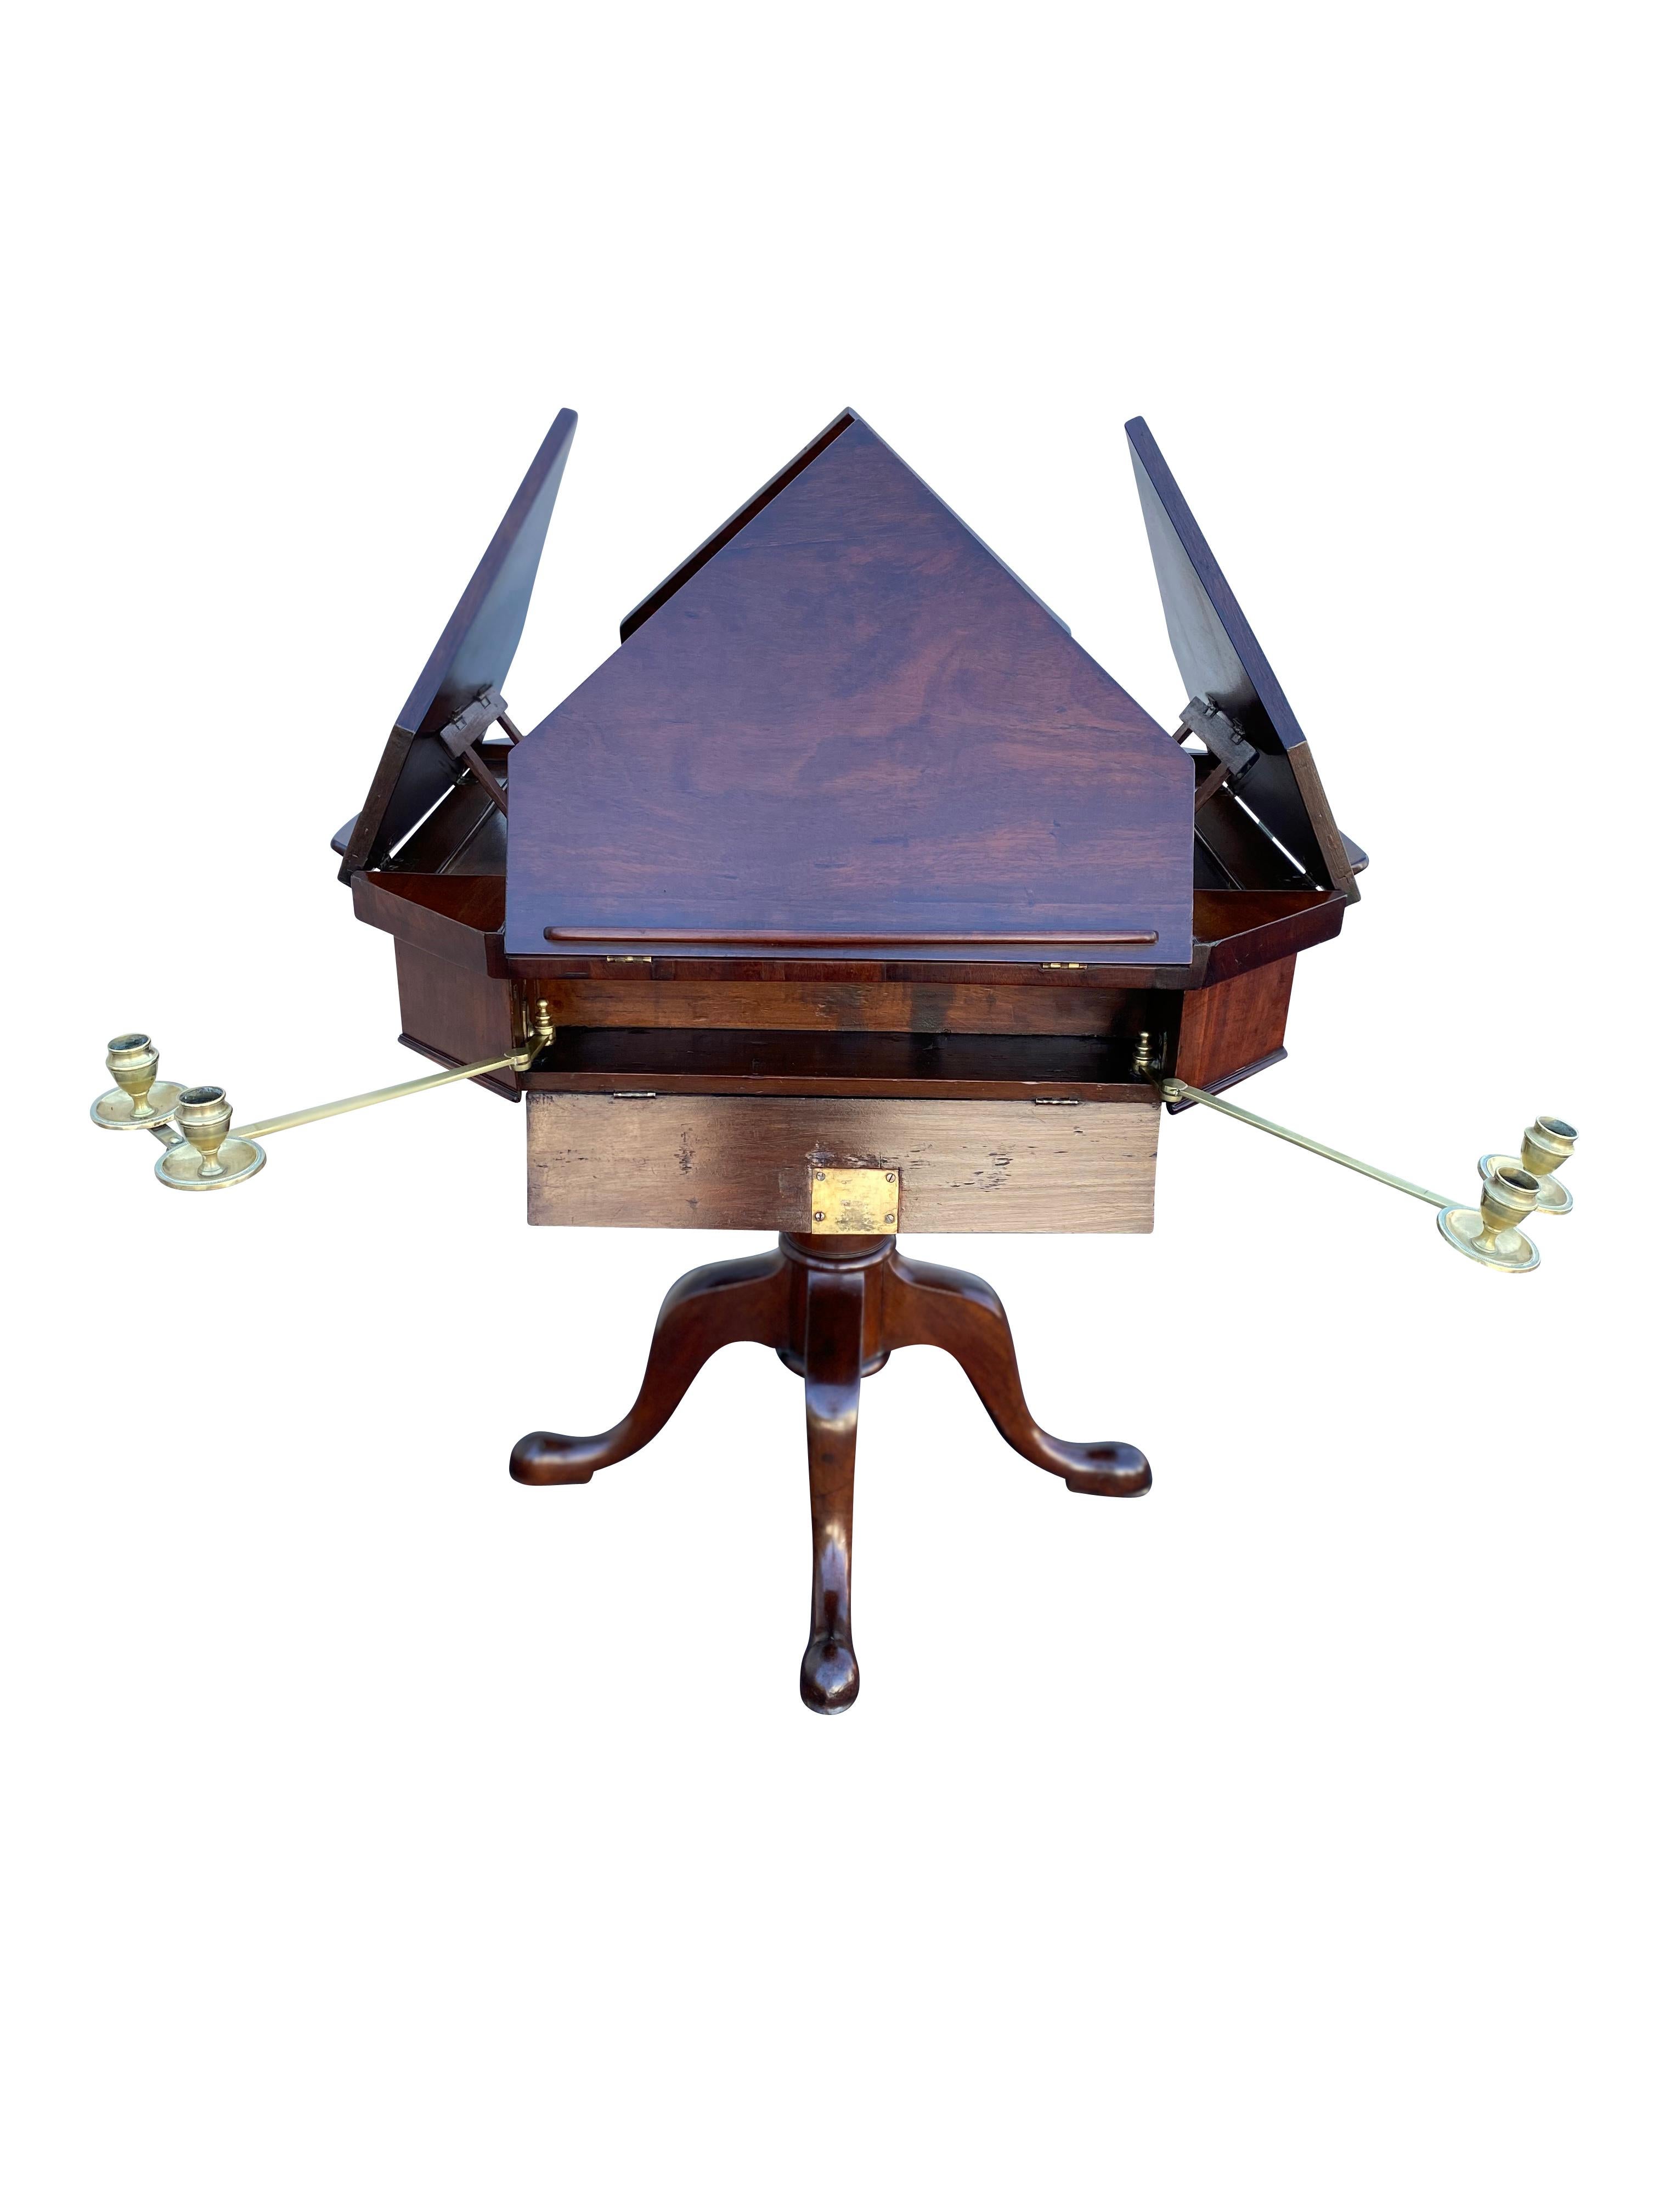 Octagonal top with four triangular ratcheted book or sheet music holders, side drawers with brass swing out candle arms, raised on a turned support ending on four cabriole legs with pad feet and casters. By repute given by Arthur Fiedler to the